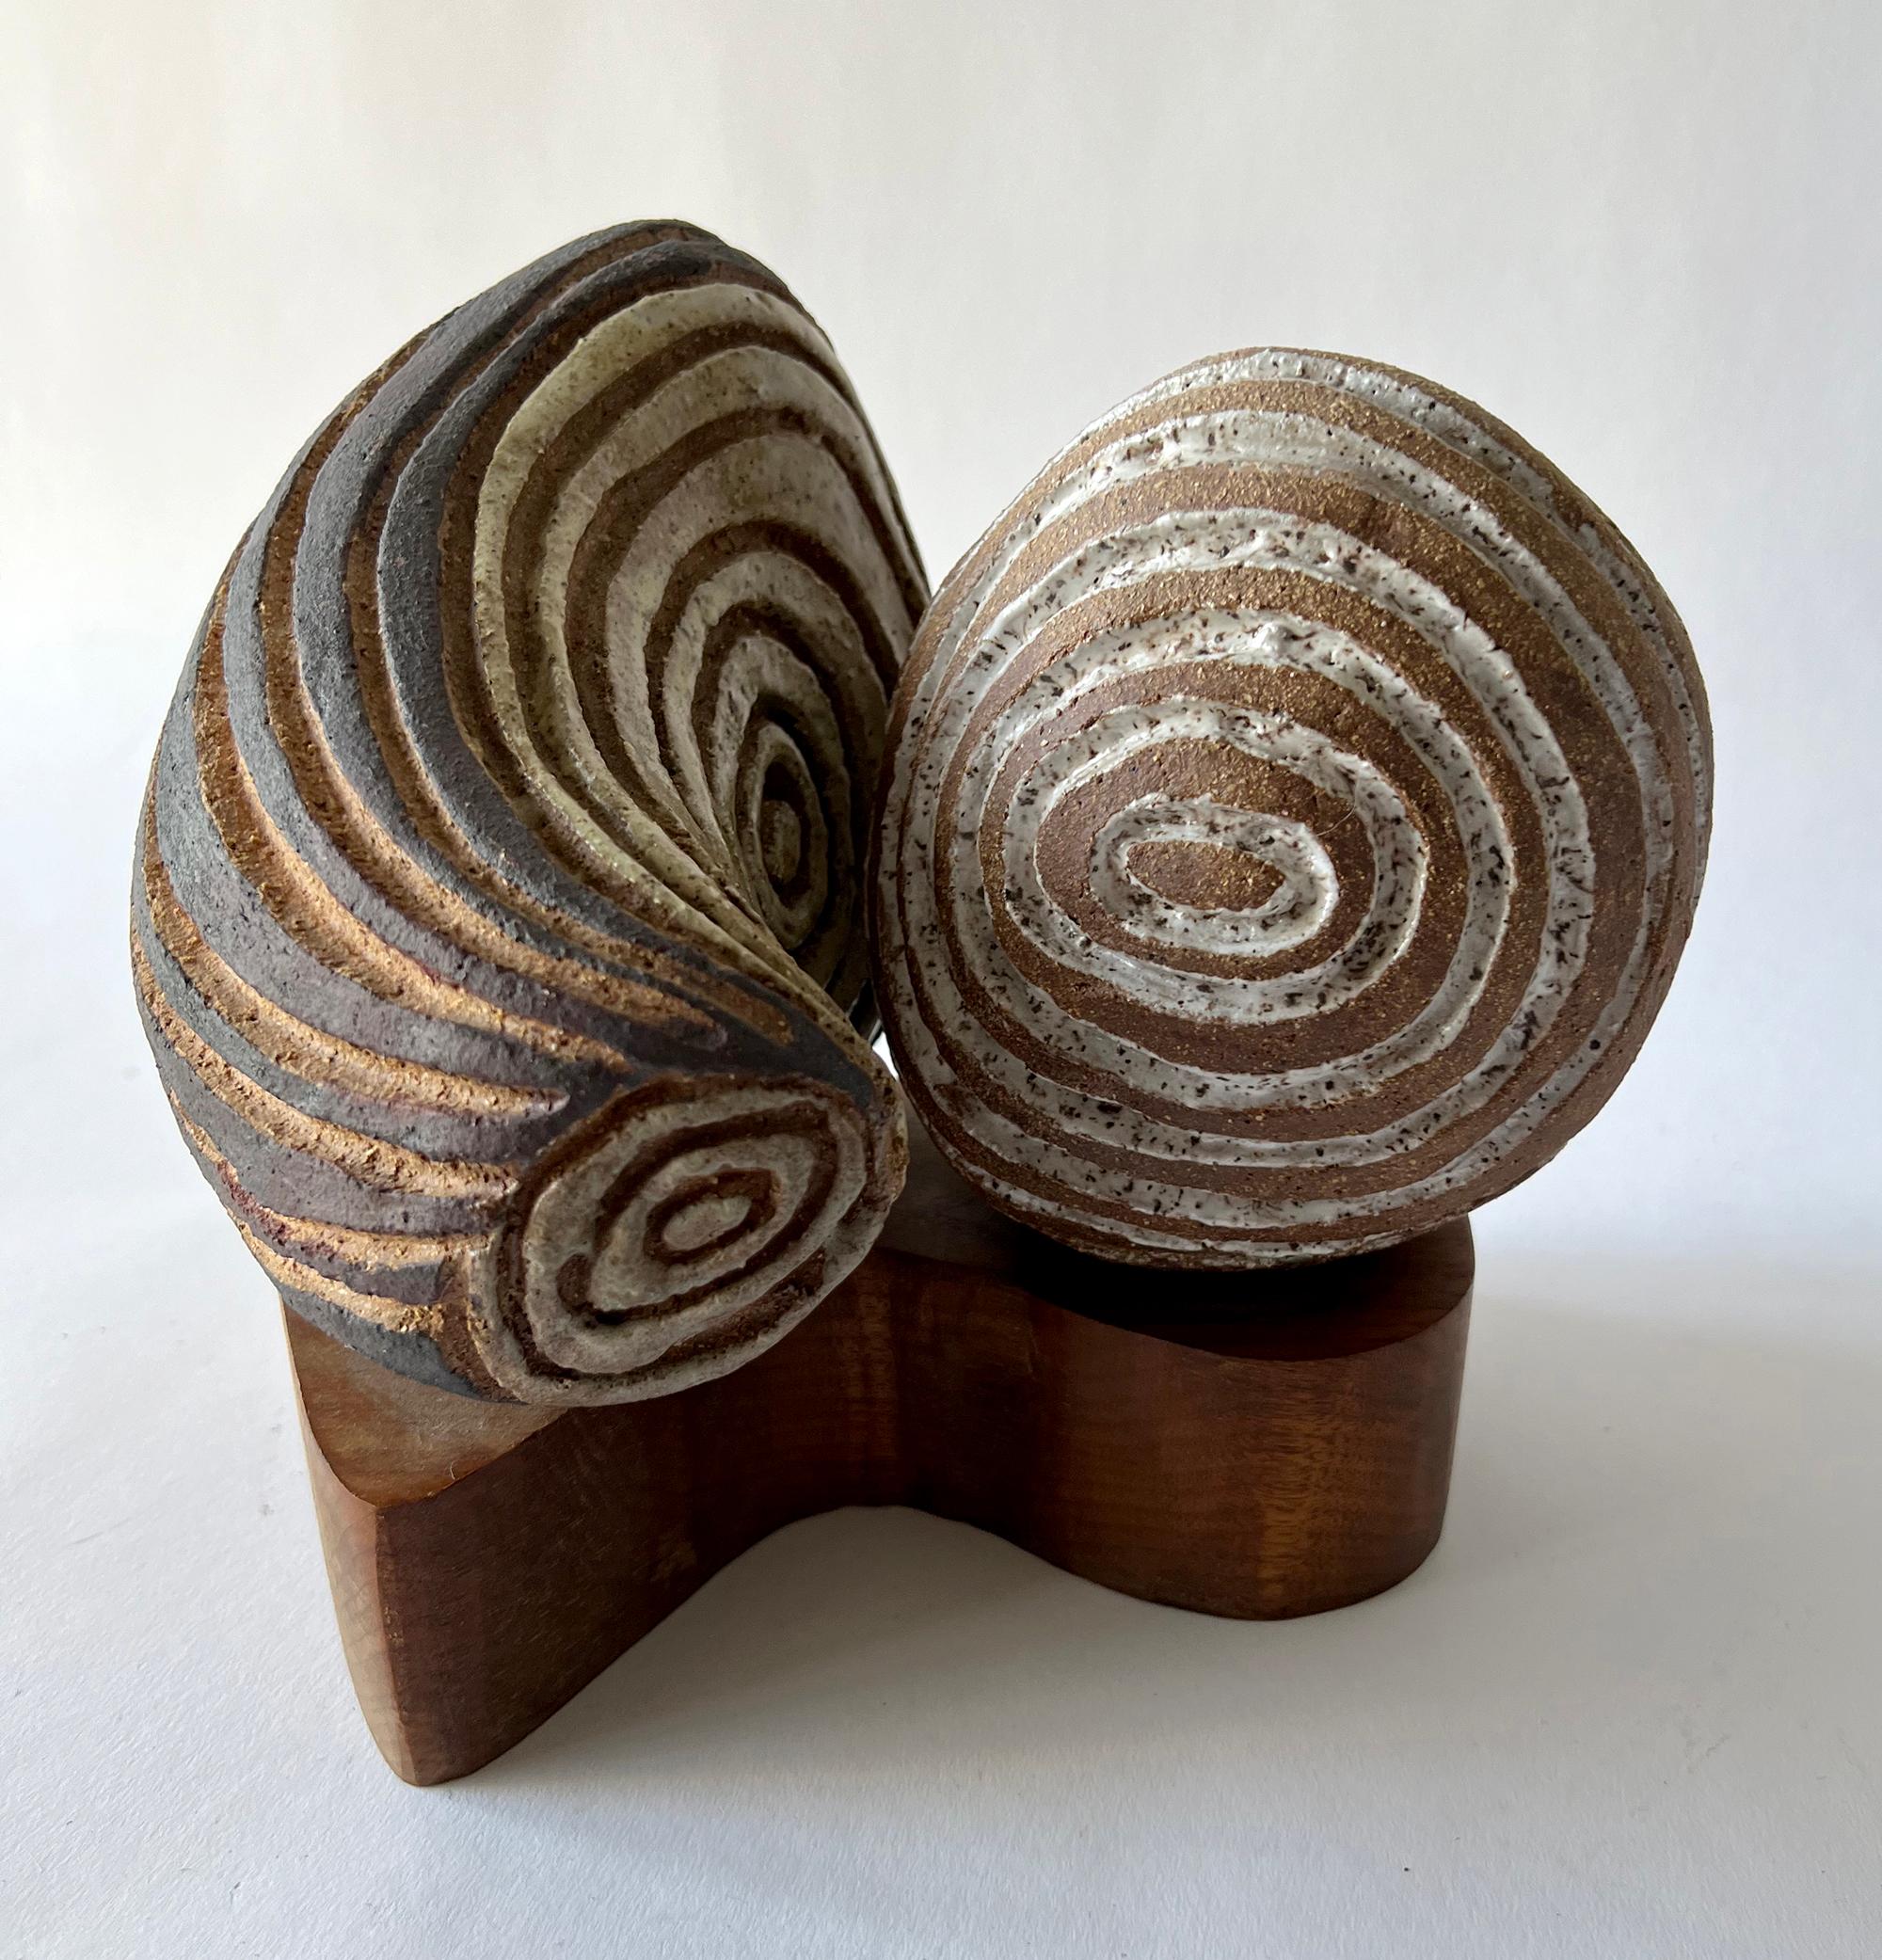 Abstract modernist Yin-Yang ceramic sculpture entitled 